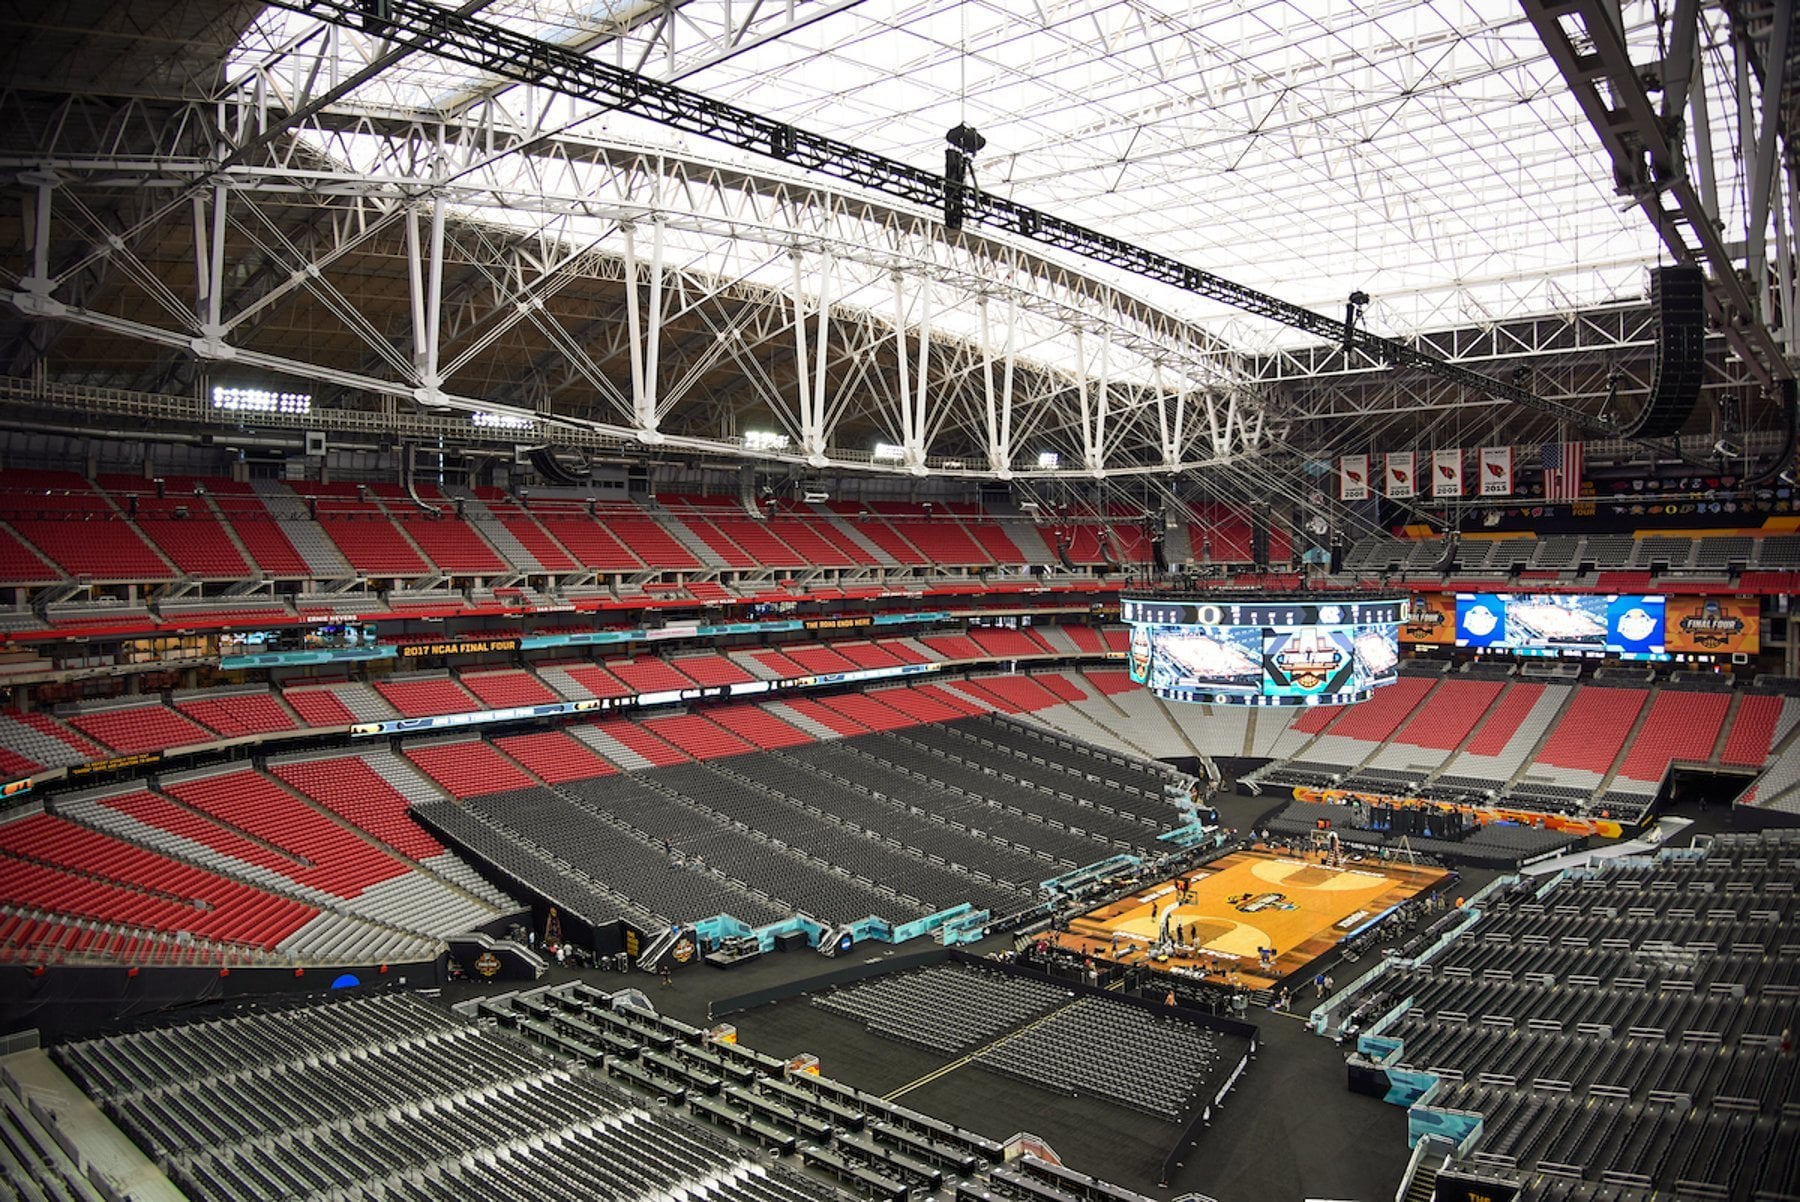 Unlocking The Magic: How To Watch The Final Four In Style